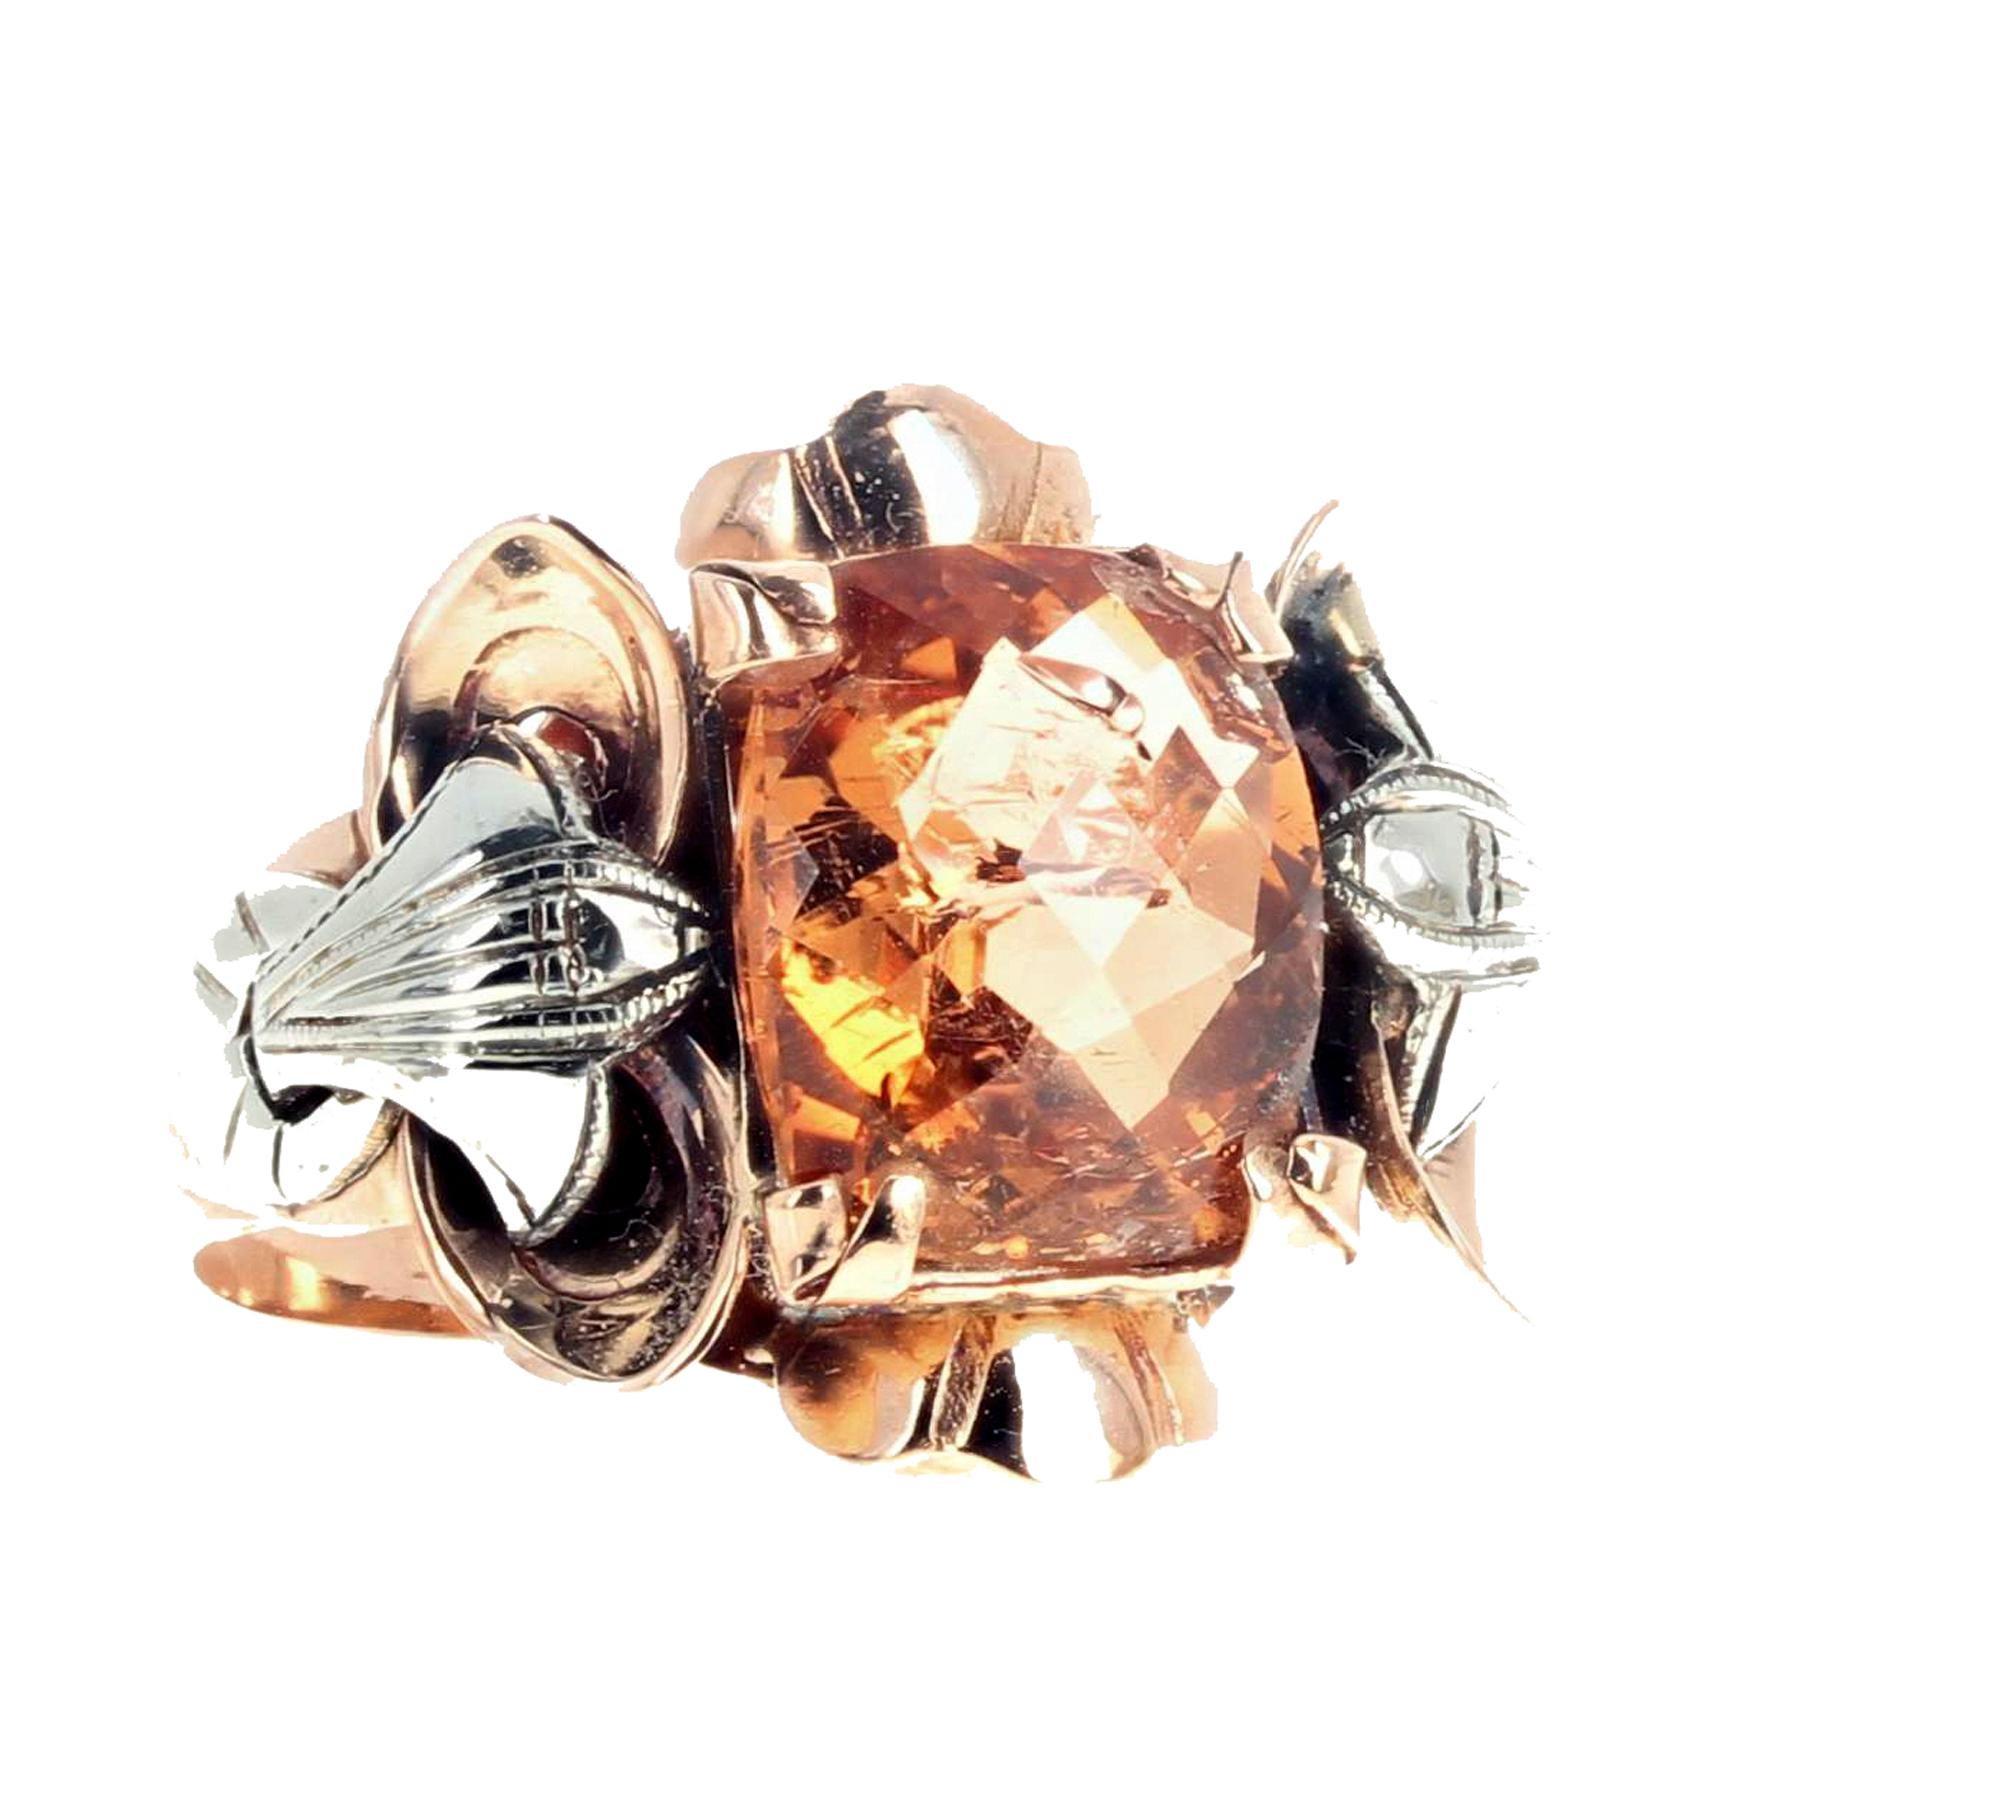 AJD VERY RARE Golden Glittering 4.95 Ct. REAL IMPERIAL TOPAZ Gold & Silver Ring For Sale 4